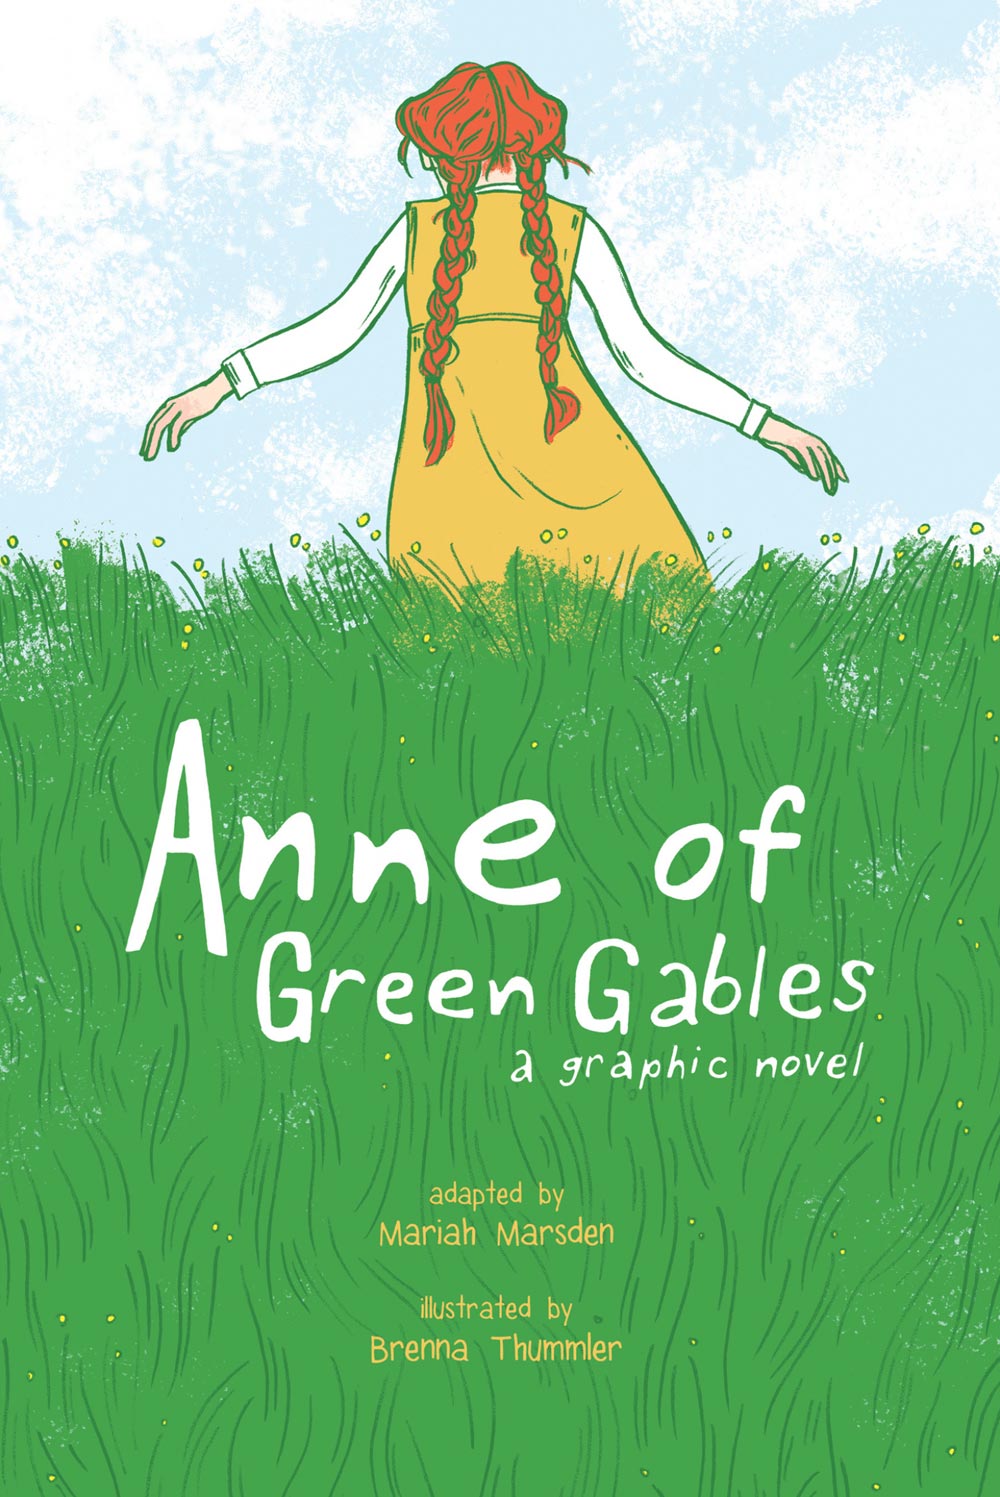 Anne of Green Gables: A Graphic Novel adapted by Mariah Marsden, illustrated by Brenna Thummler